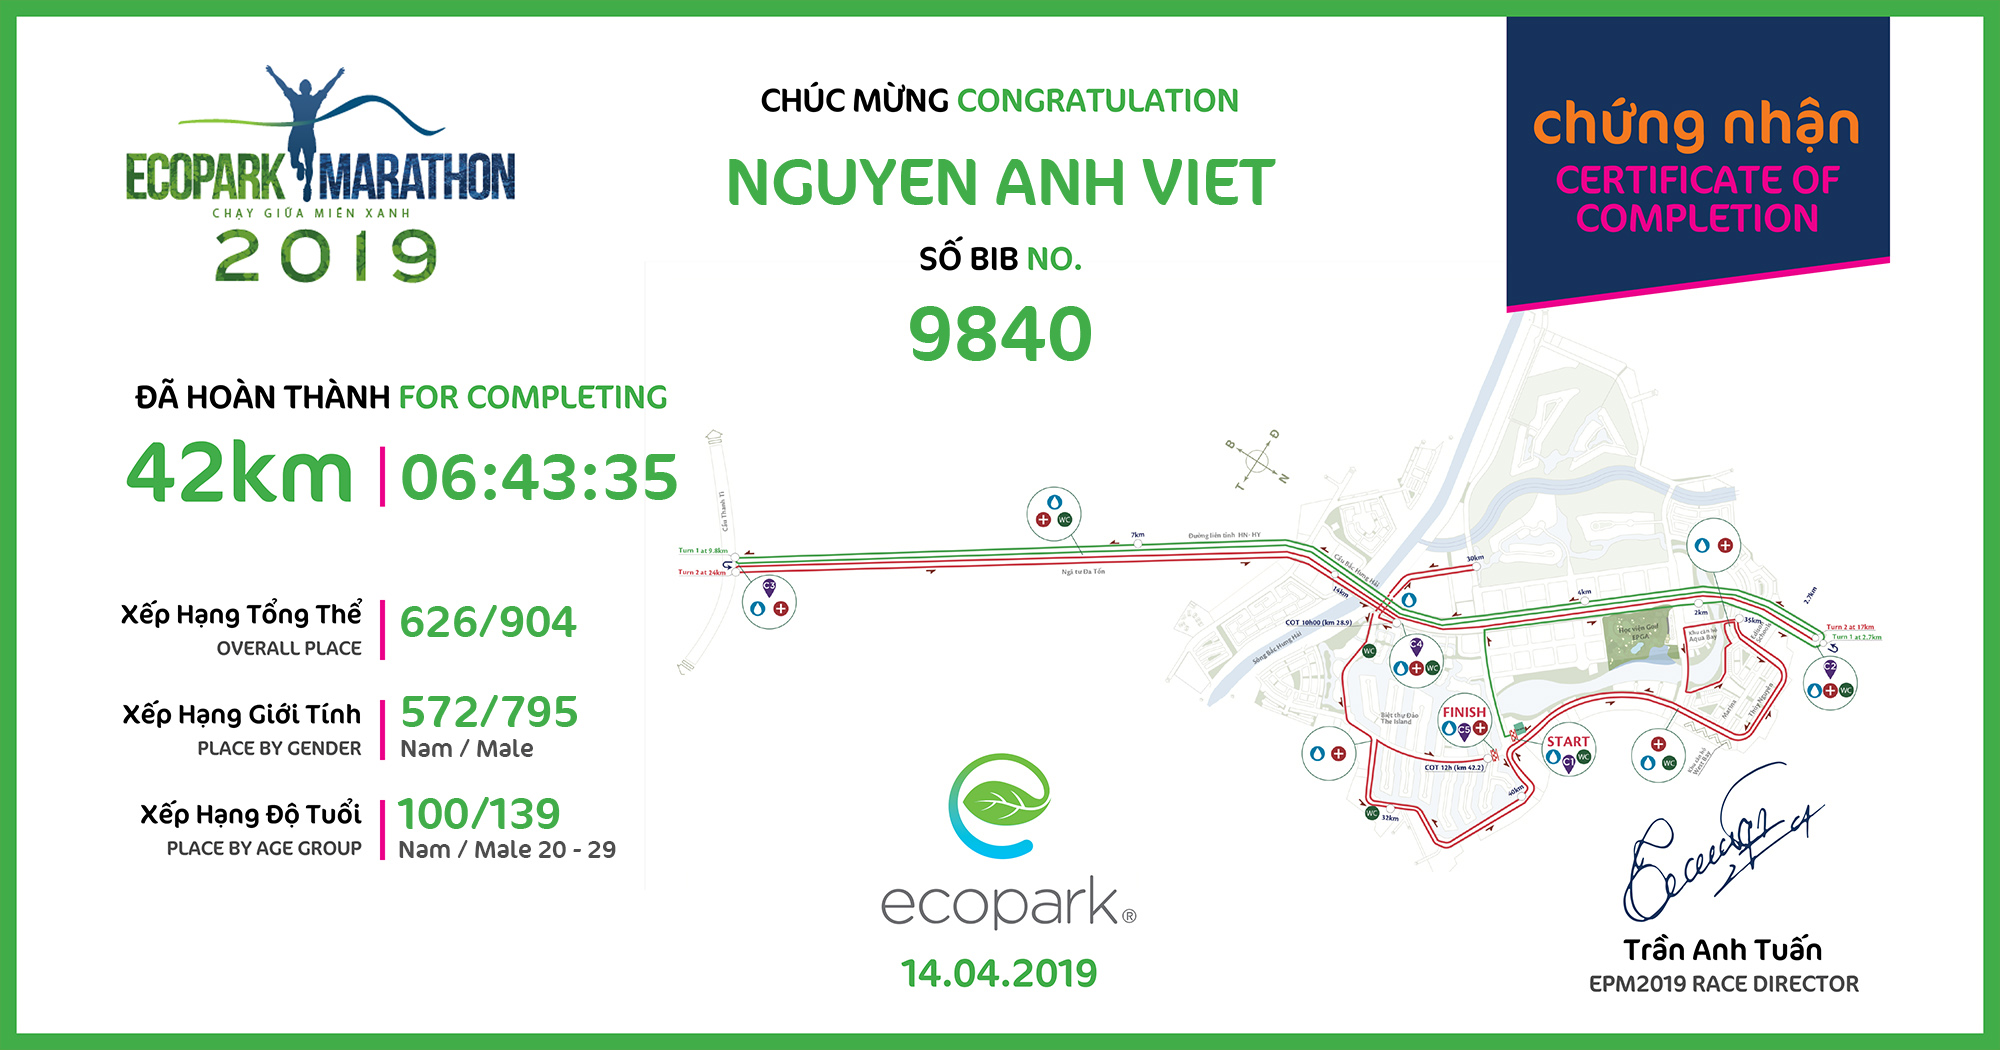 9840 - Nguyen Anh Viet